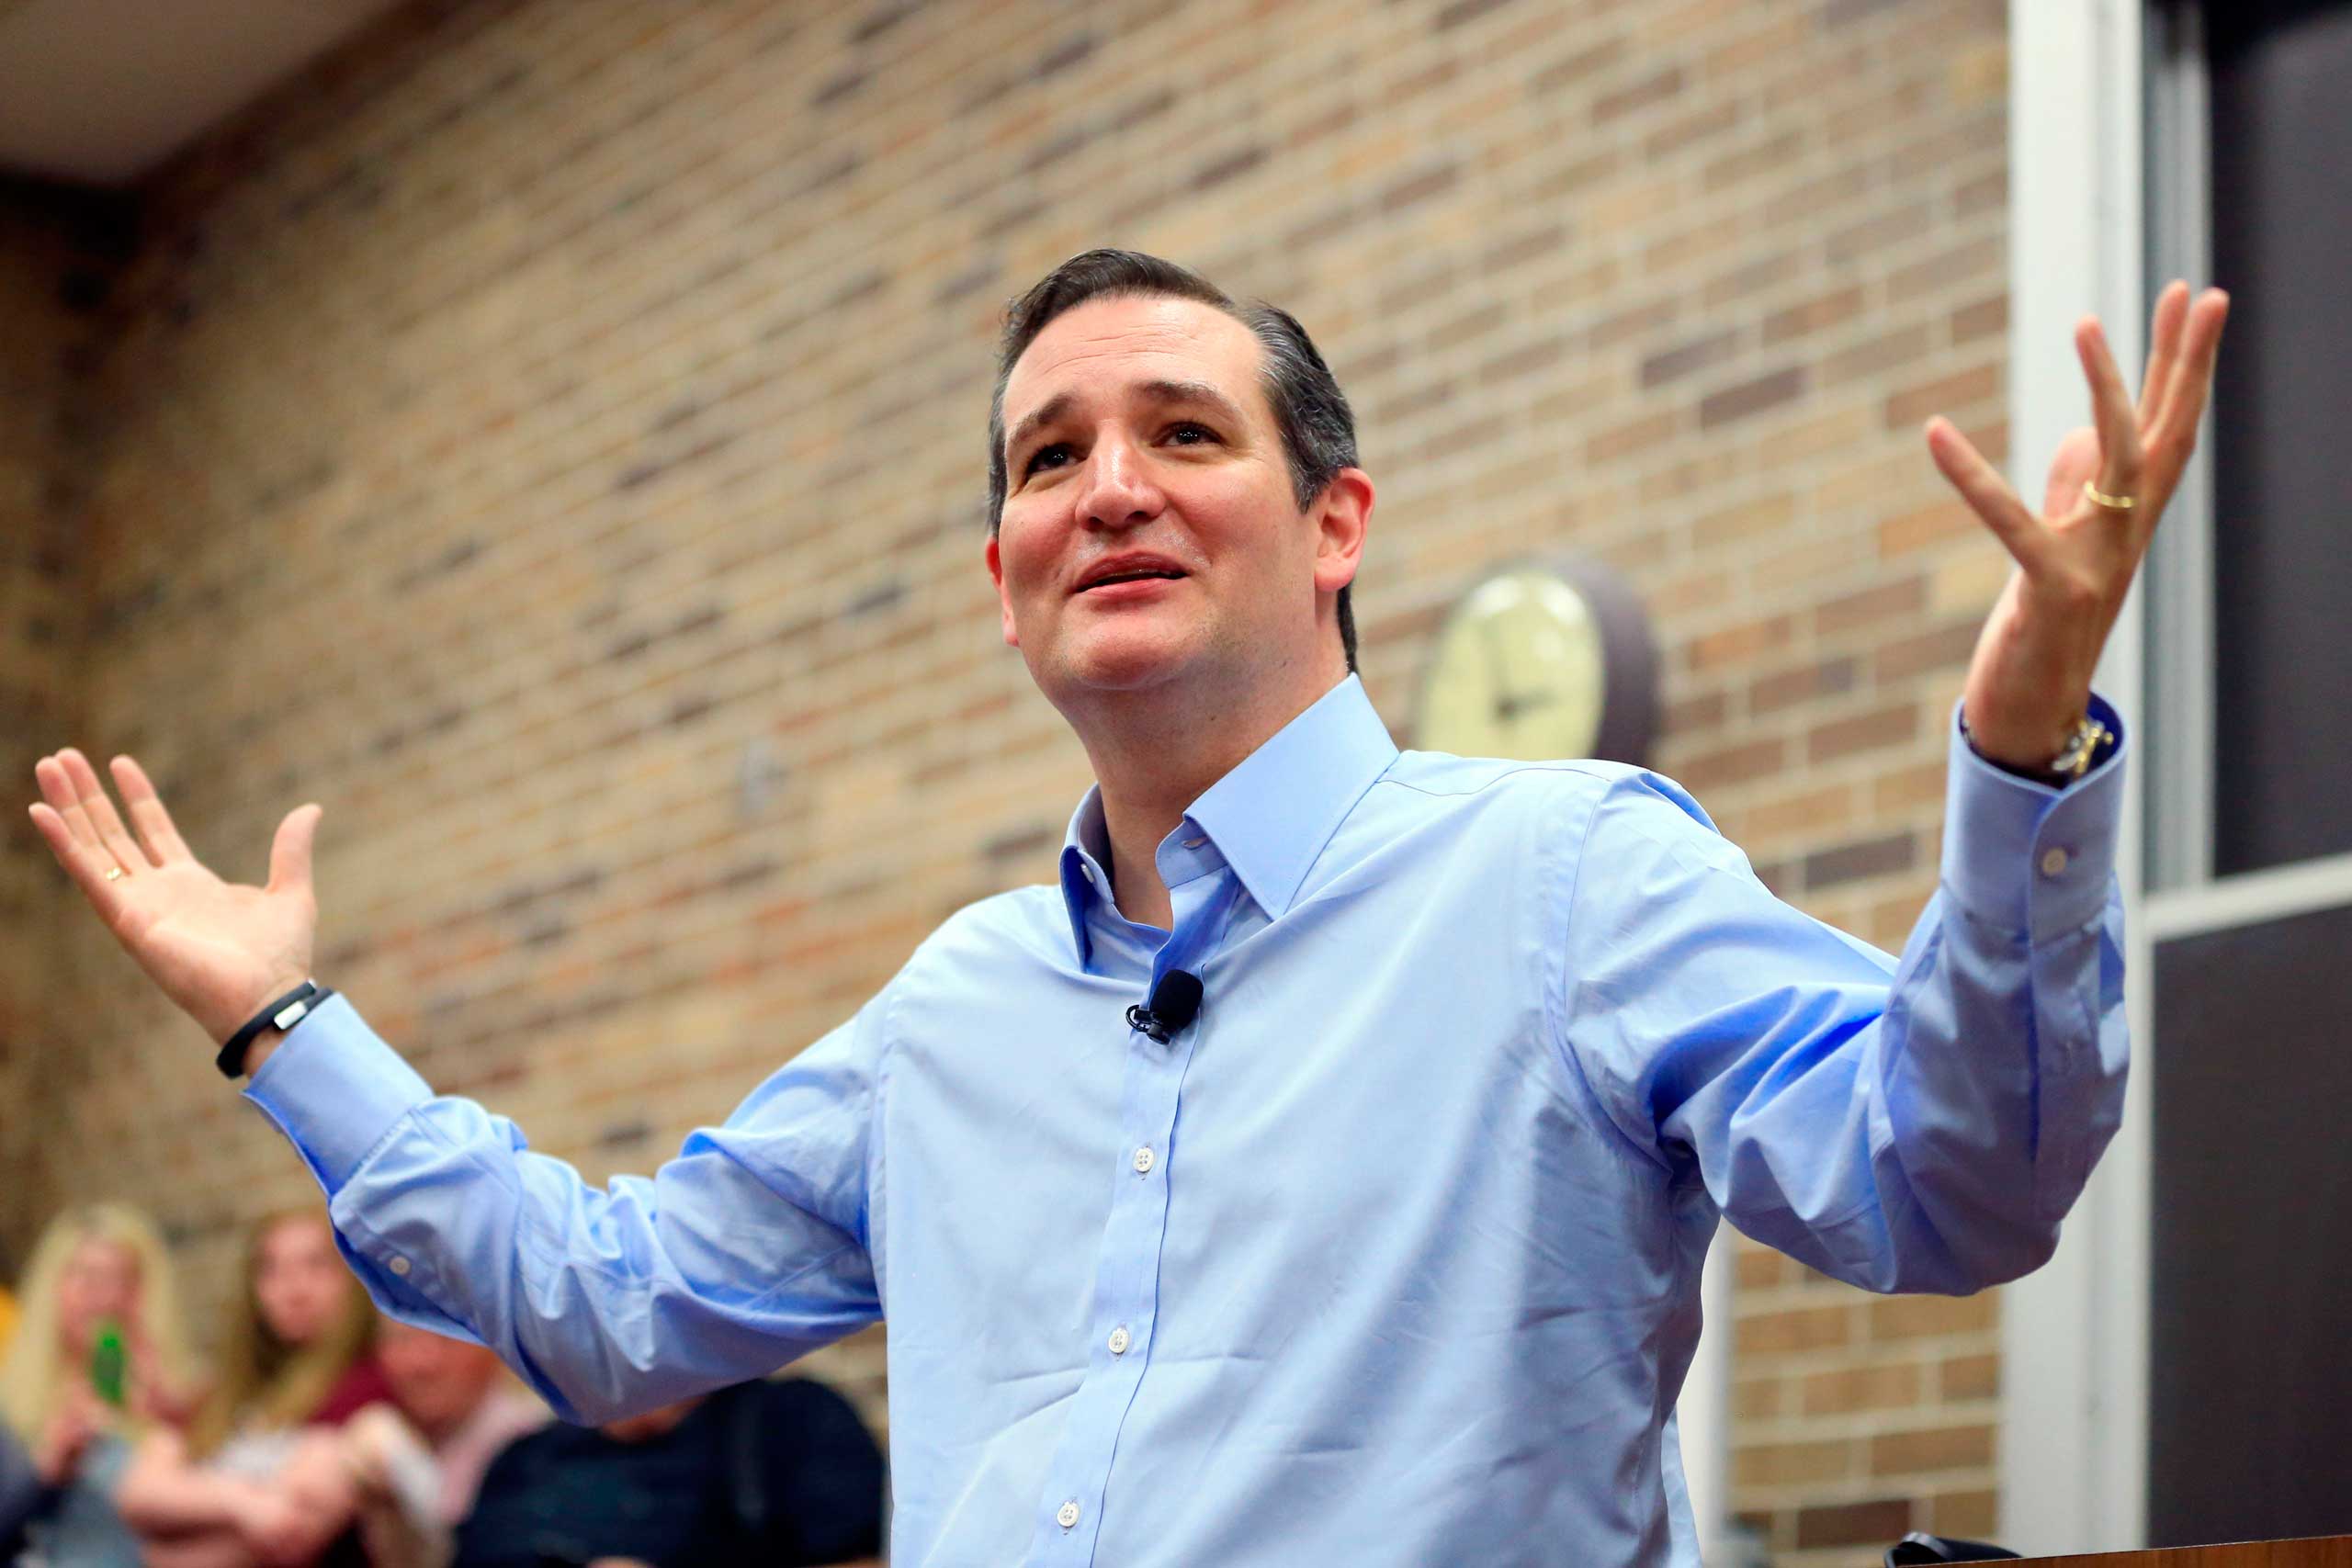 Republican presidential candidate Sen. Ted Cruz, R-Texas, speaks during a town hall event at Morningside College in Sioux City, Iowa on April 1, 2015. (Nati Harnik—AP)